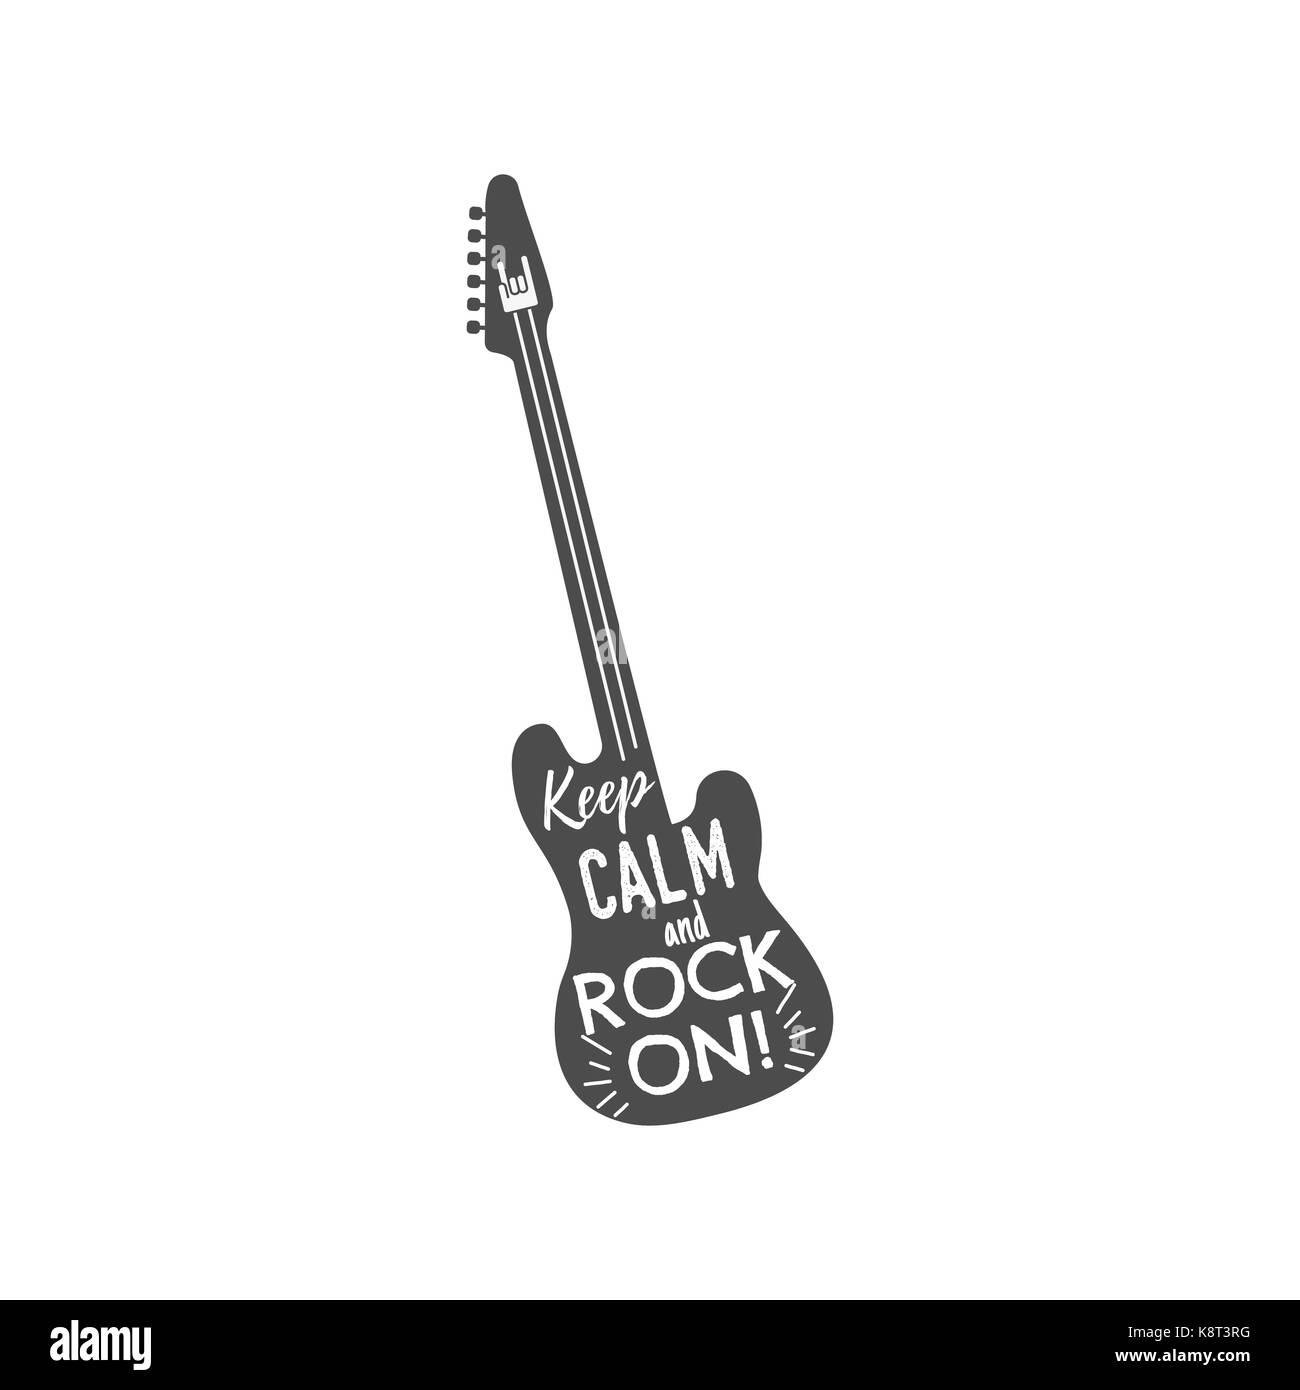 rock guitar emblem with text inside. Keep calm and rock on. Monochrome design for t shirt, prints. Stock vector illustration isolated on white background. Stock Vector